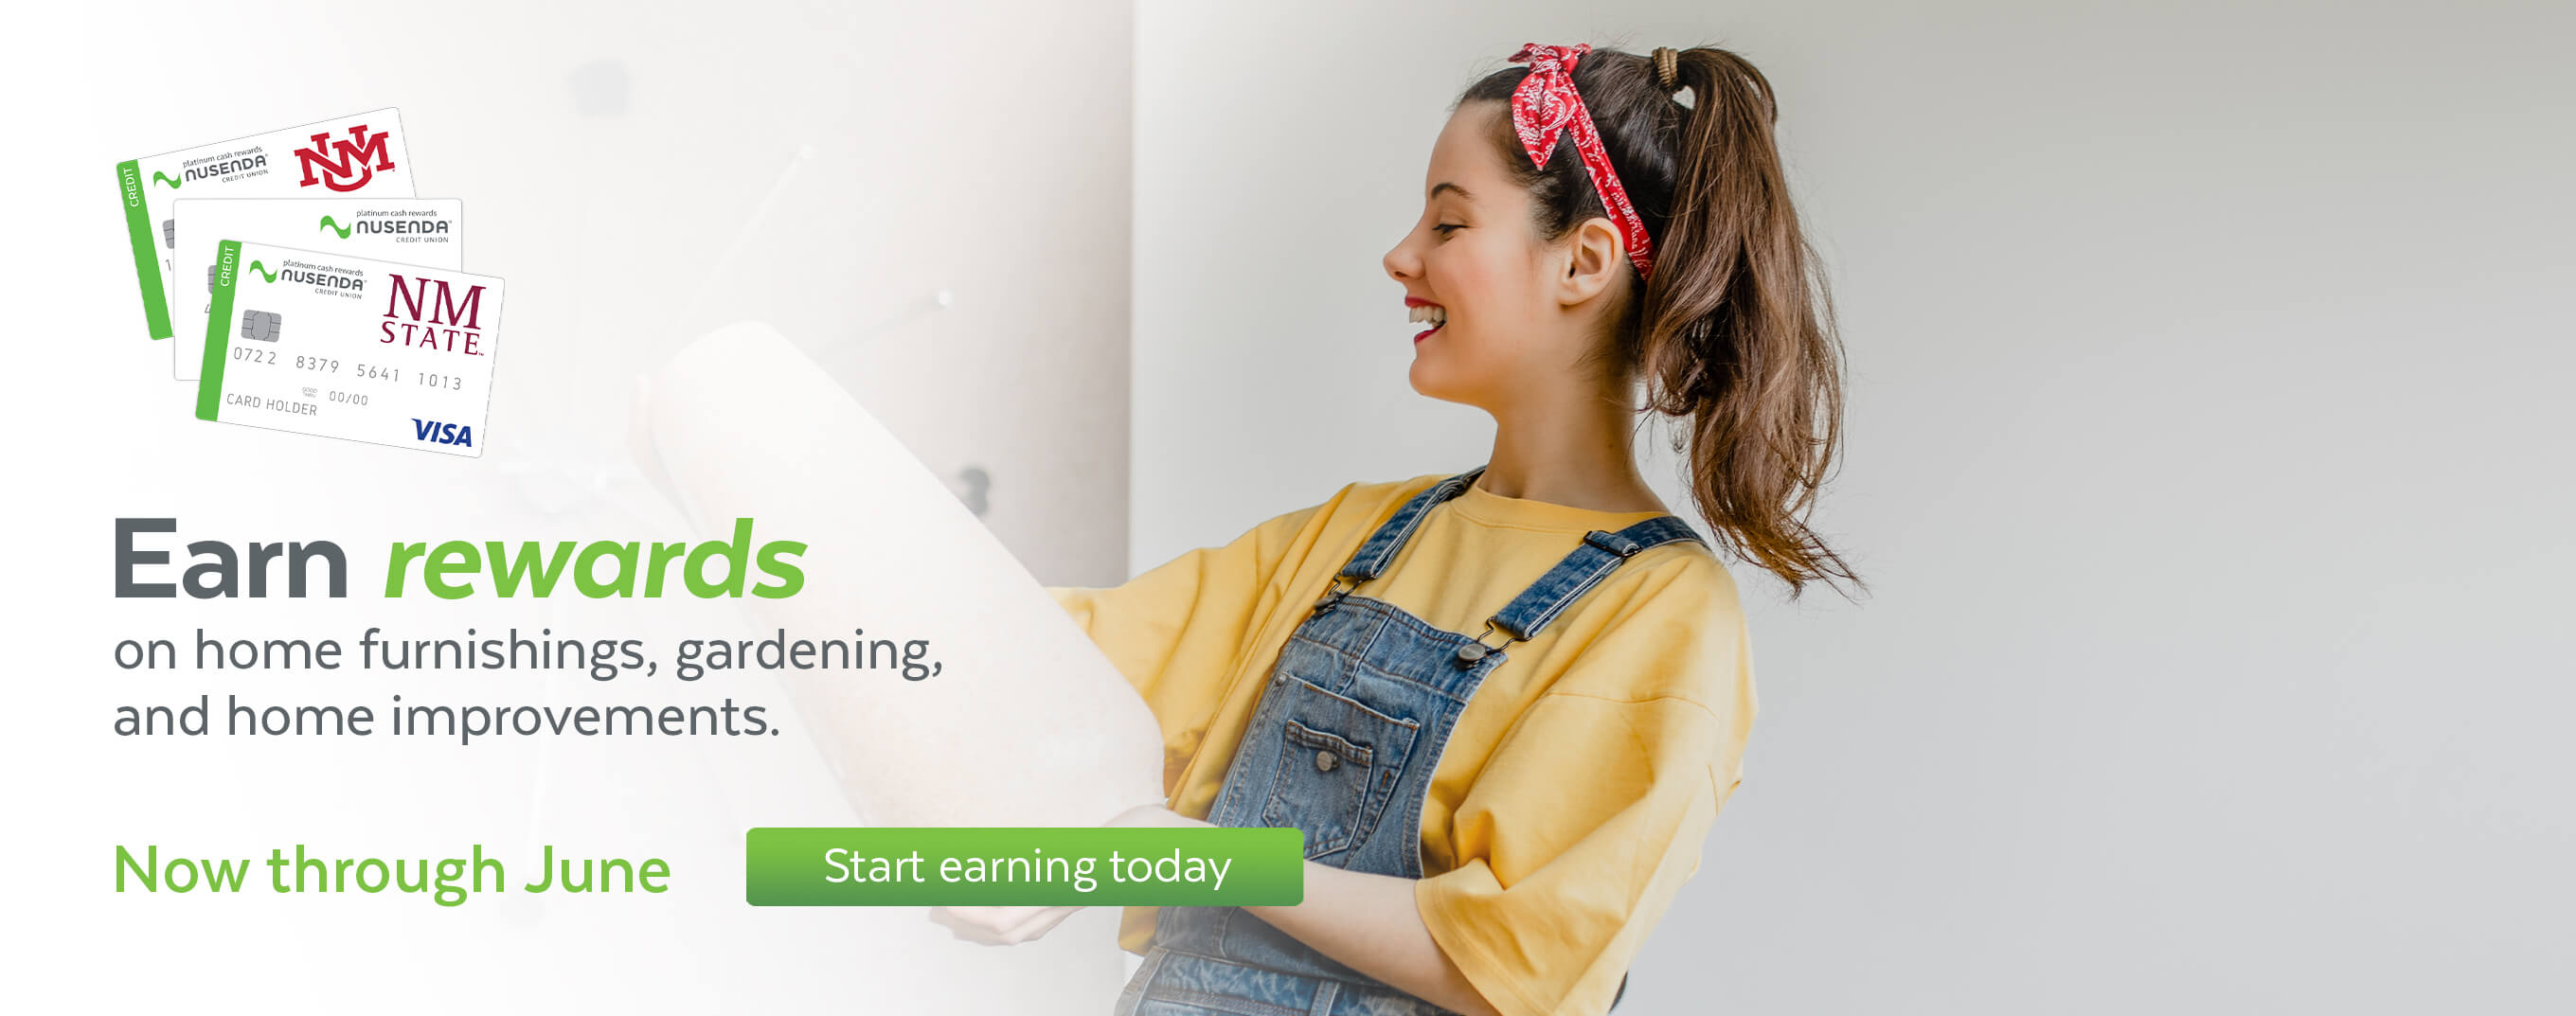 Earn rewards on home furnishings, home improvements, and gardening now through June.